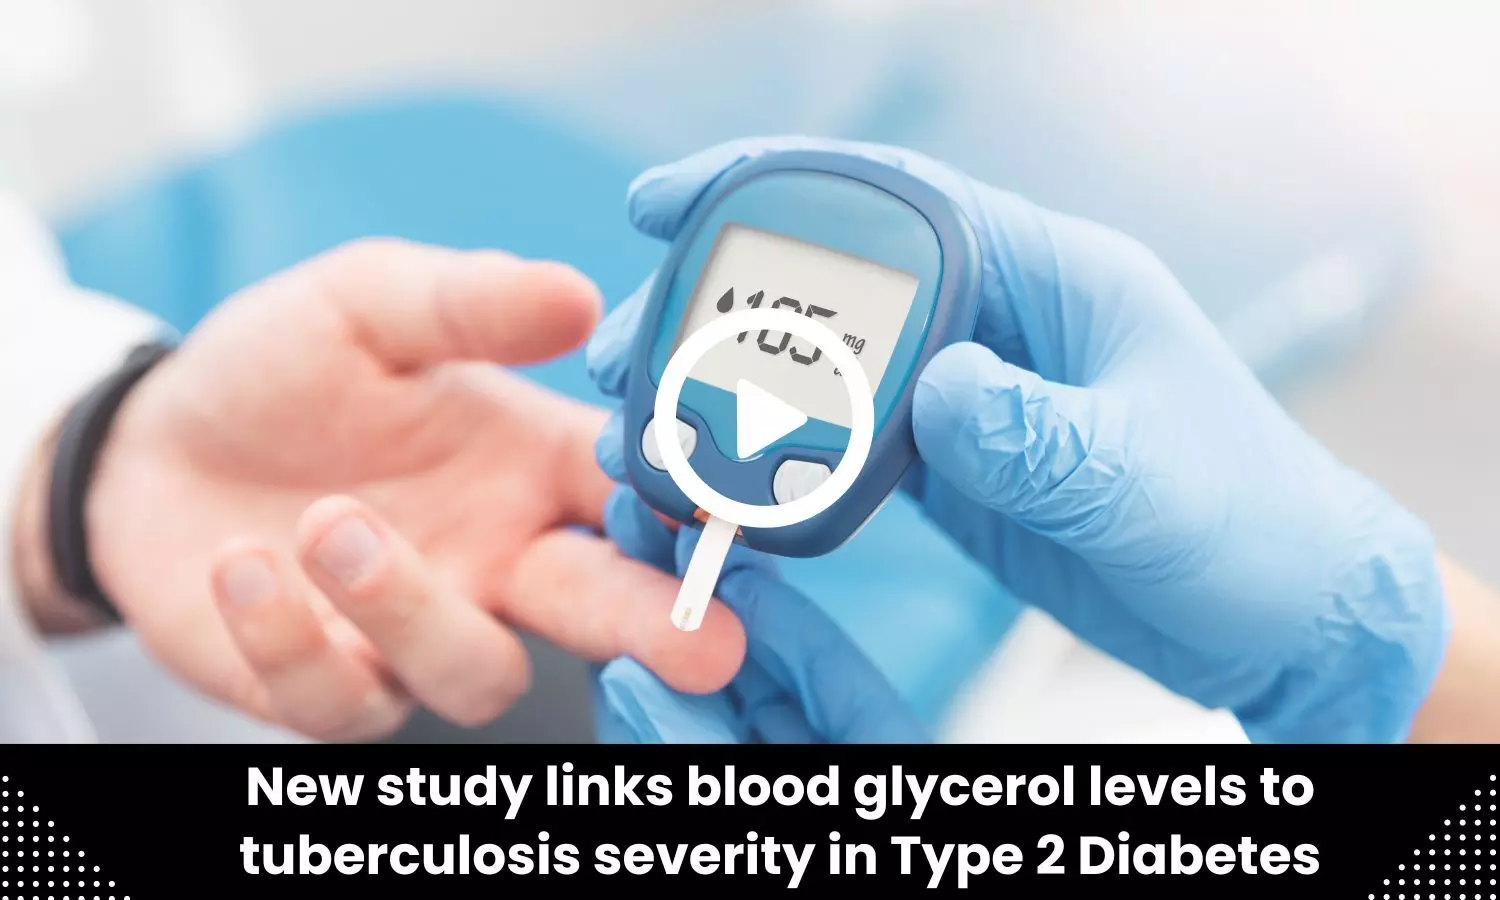 New study links blood glycerol levels to tuberculosis severity in Type 2 Diabetes